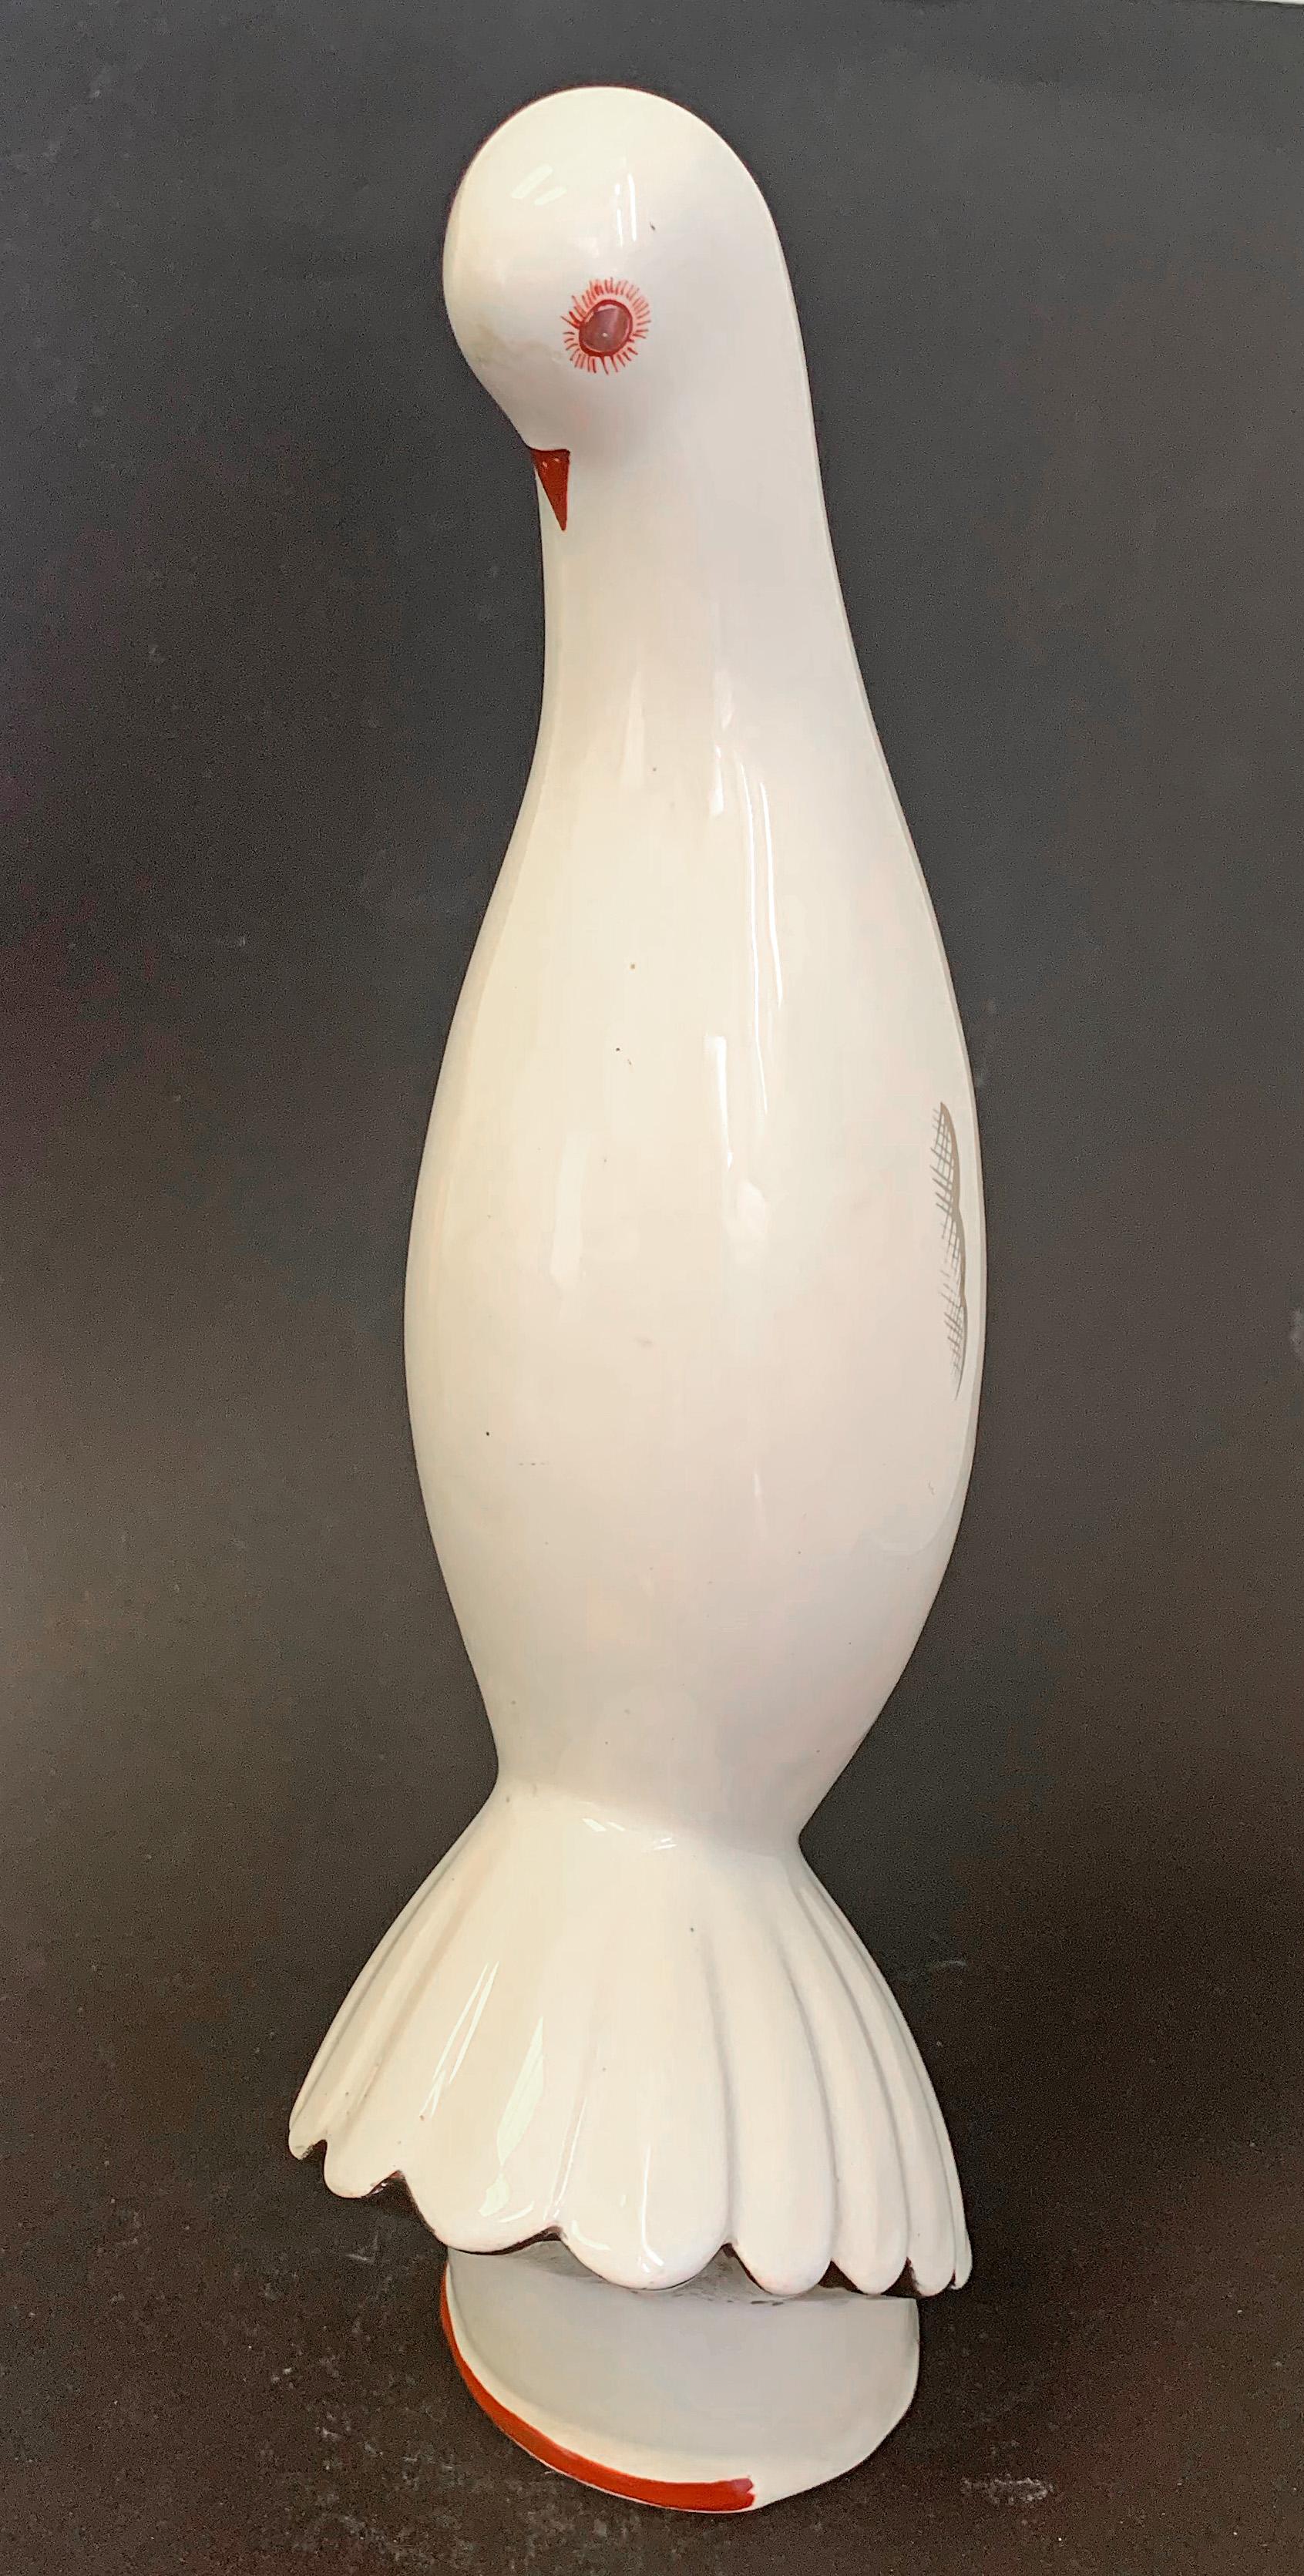 Almost Brancusi-esque in its sleek economy of form, this very rare porcelain sculpture was created by the Primavera workshop, and depicts a lean, vertical pigeon with a discreet spray of tail features, its beak tucked into its breast. The form is